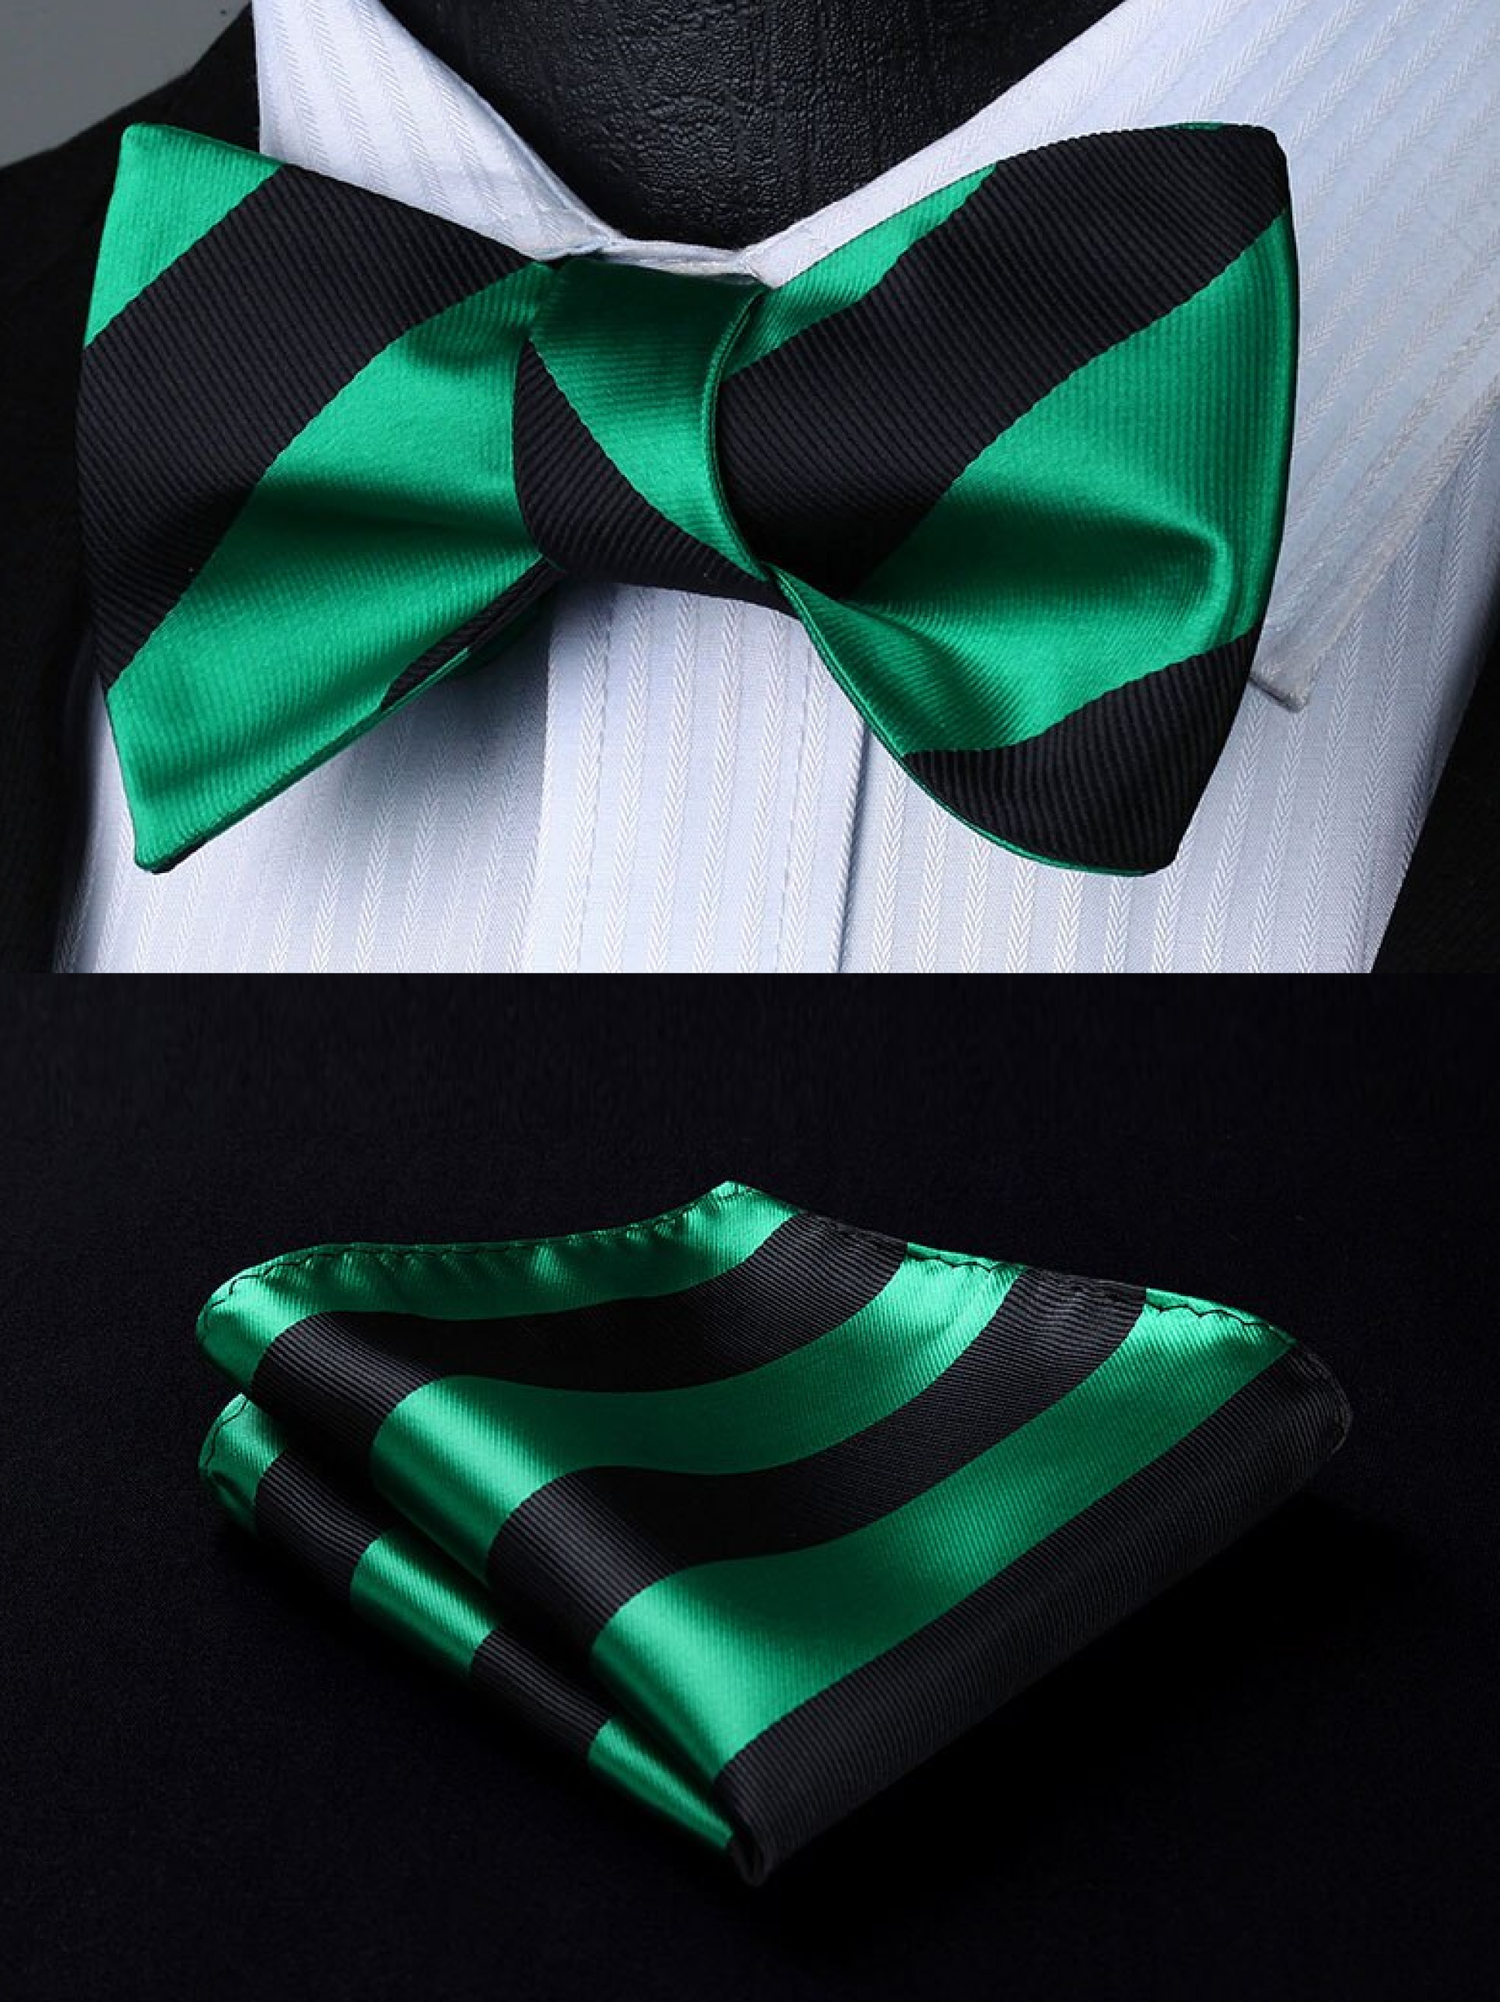 Main View: Green Black Stripe Bow Tie and Pocket Square